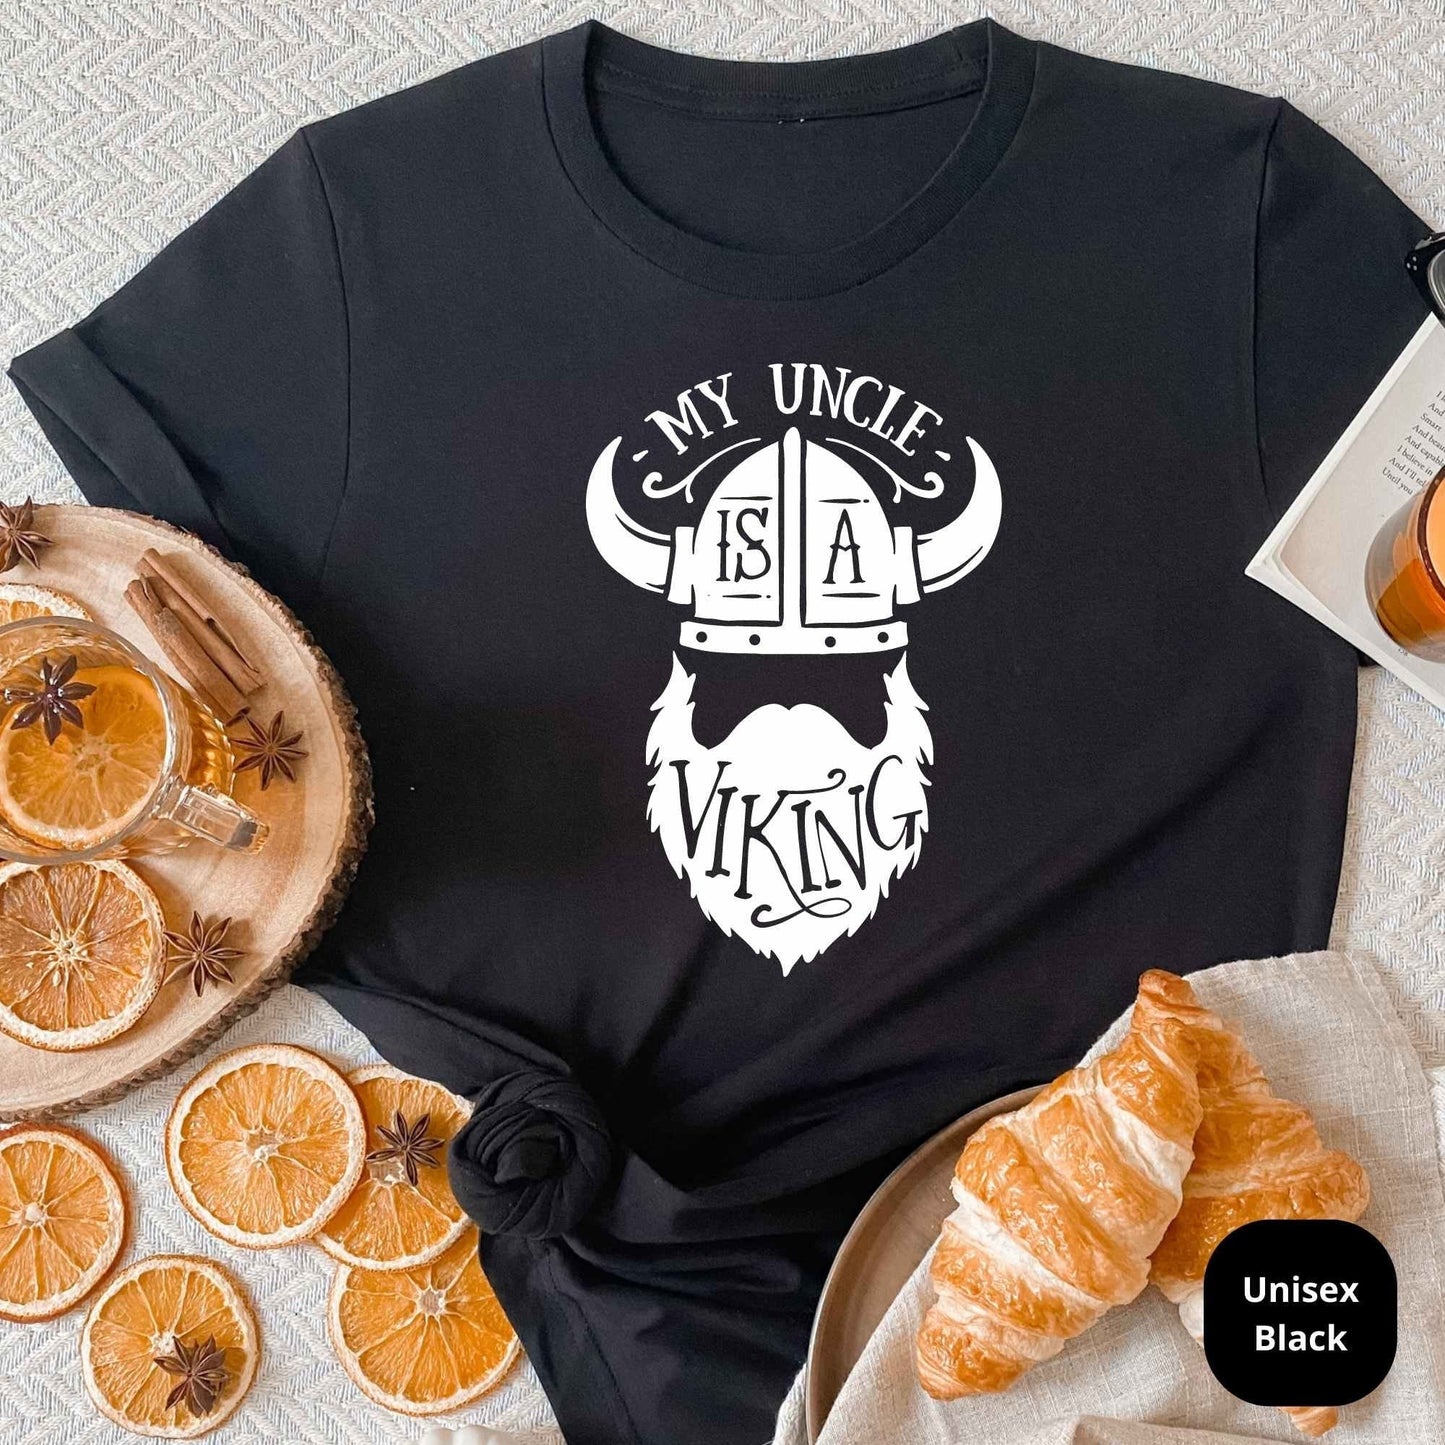 Beard Lover Shirt | Funny Beard Tee for Uncle, Son, Husband, Boyfriend | Christmas, Birthday, Father's Day Gift for Uncle from Niece/Nephew HMDesignStudioUS